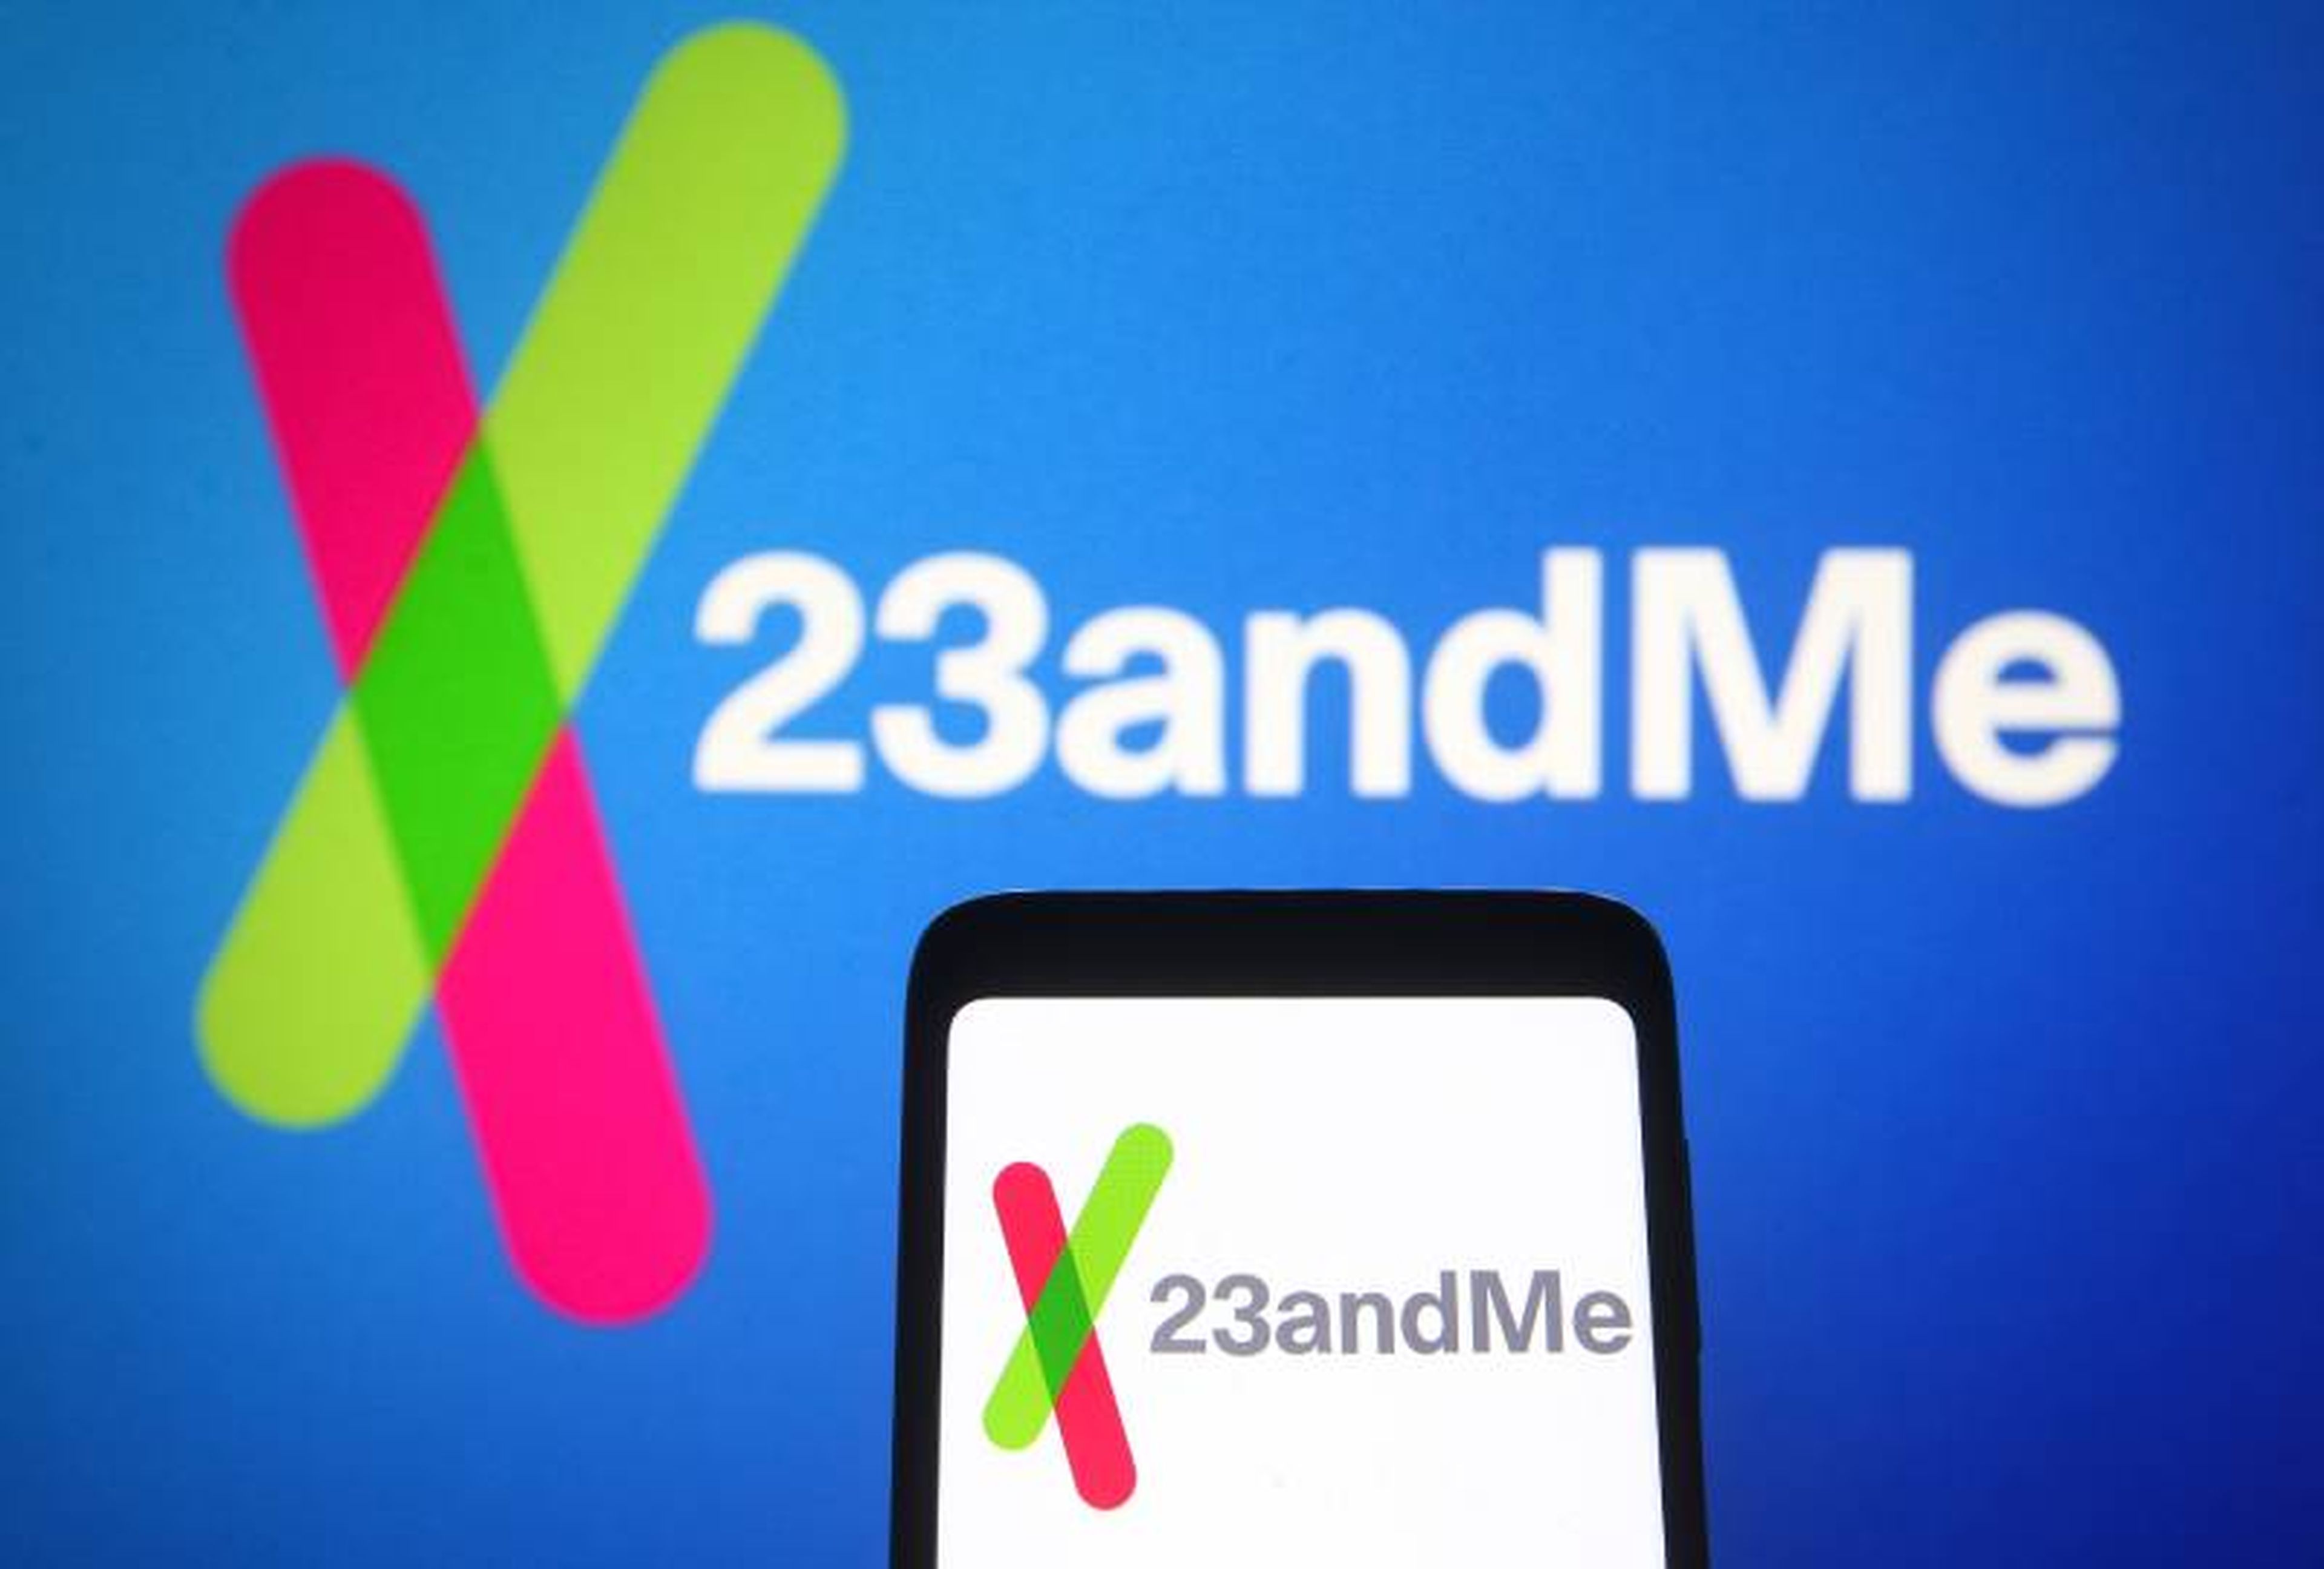 In this photo illustration, 23andMe logo of a biotechnology company is seen on a smartphone and a pc screen in the background.